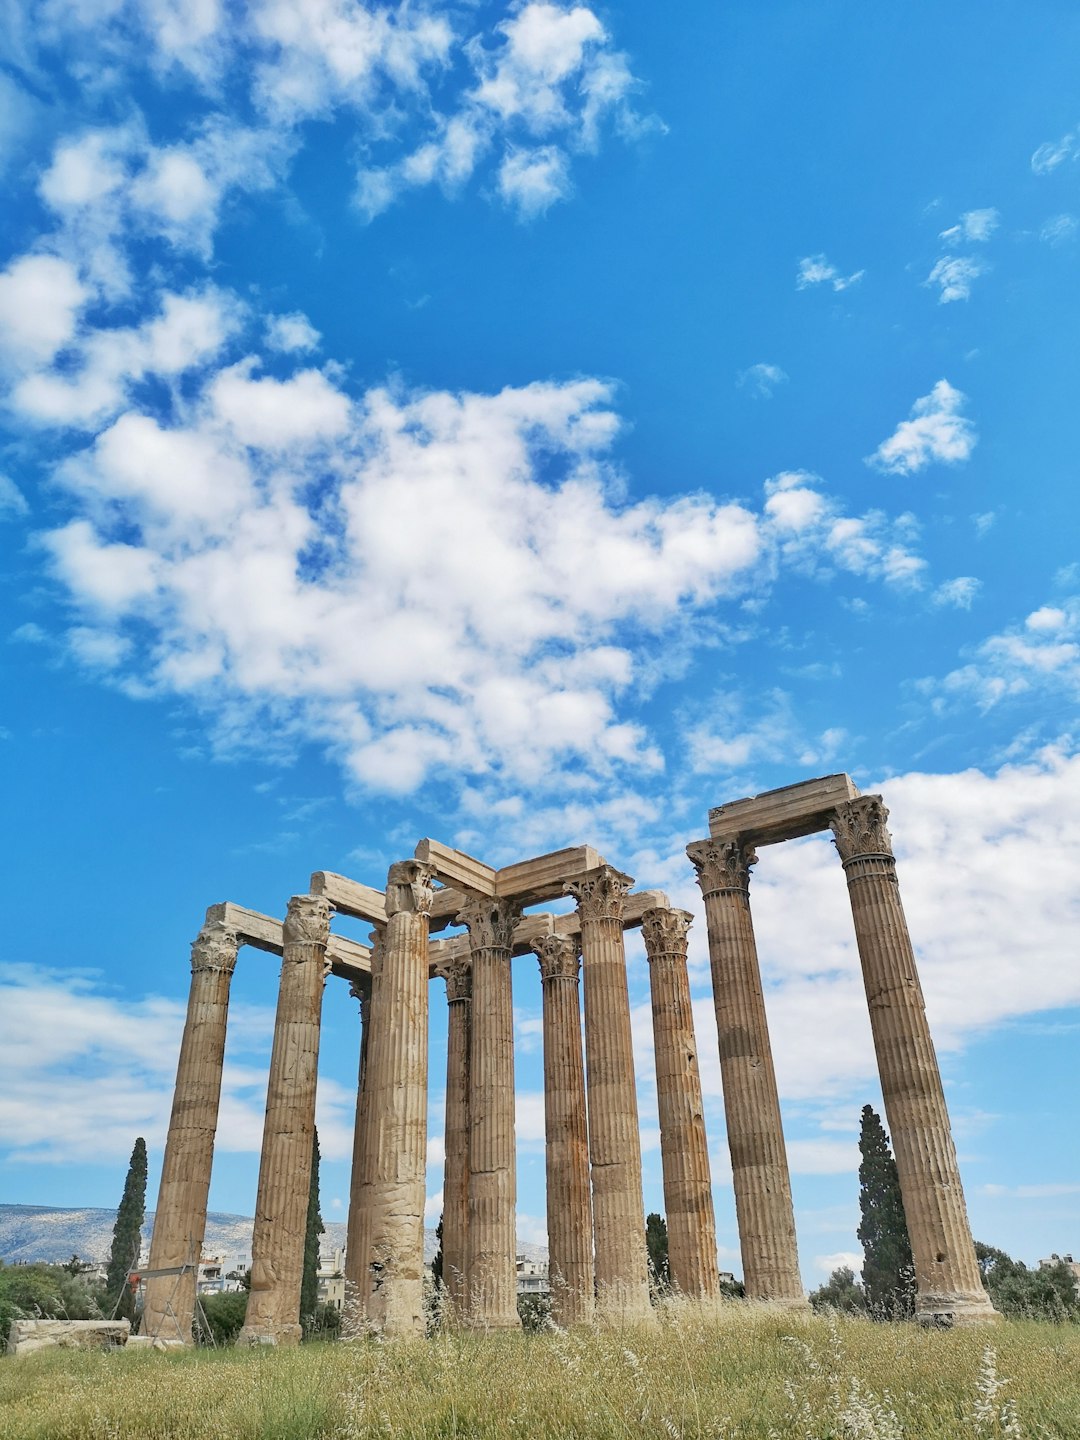 Travel Tips and Stories of Temple of Olympian Zeus in Greece